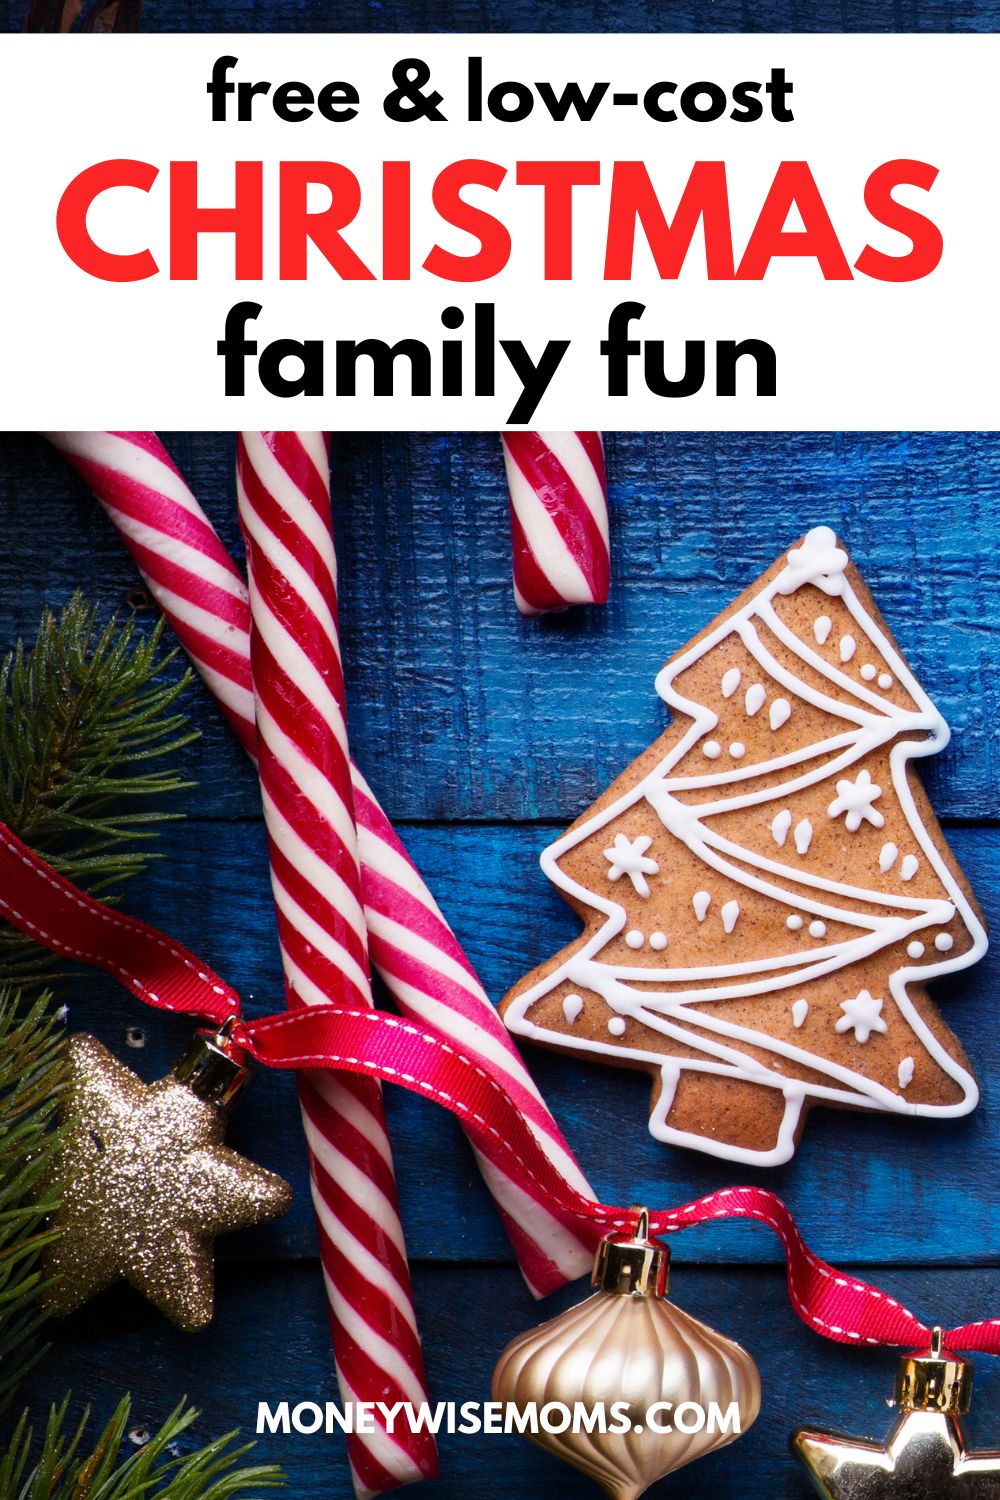 Free and low-cost Christmas family fun activities